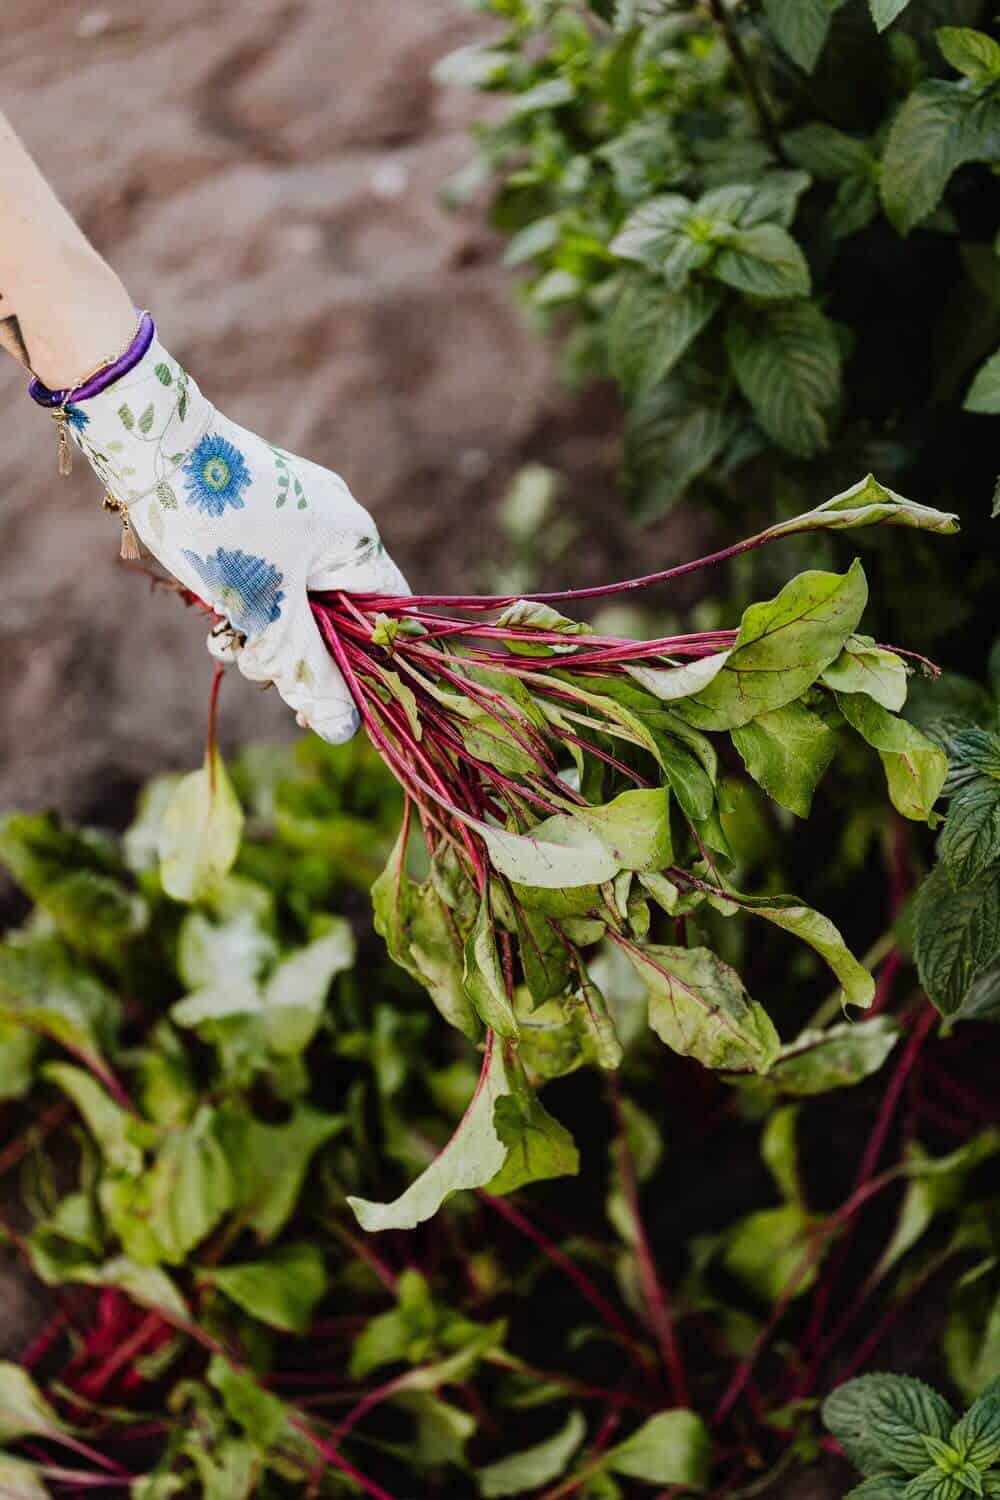 Hand with a glove planting beets